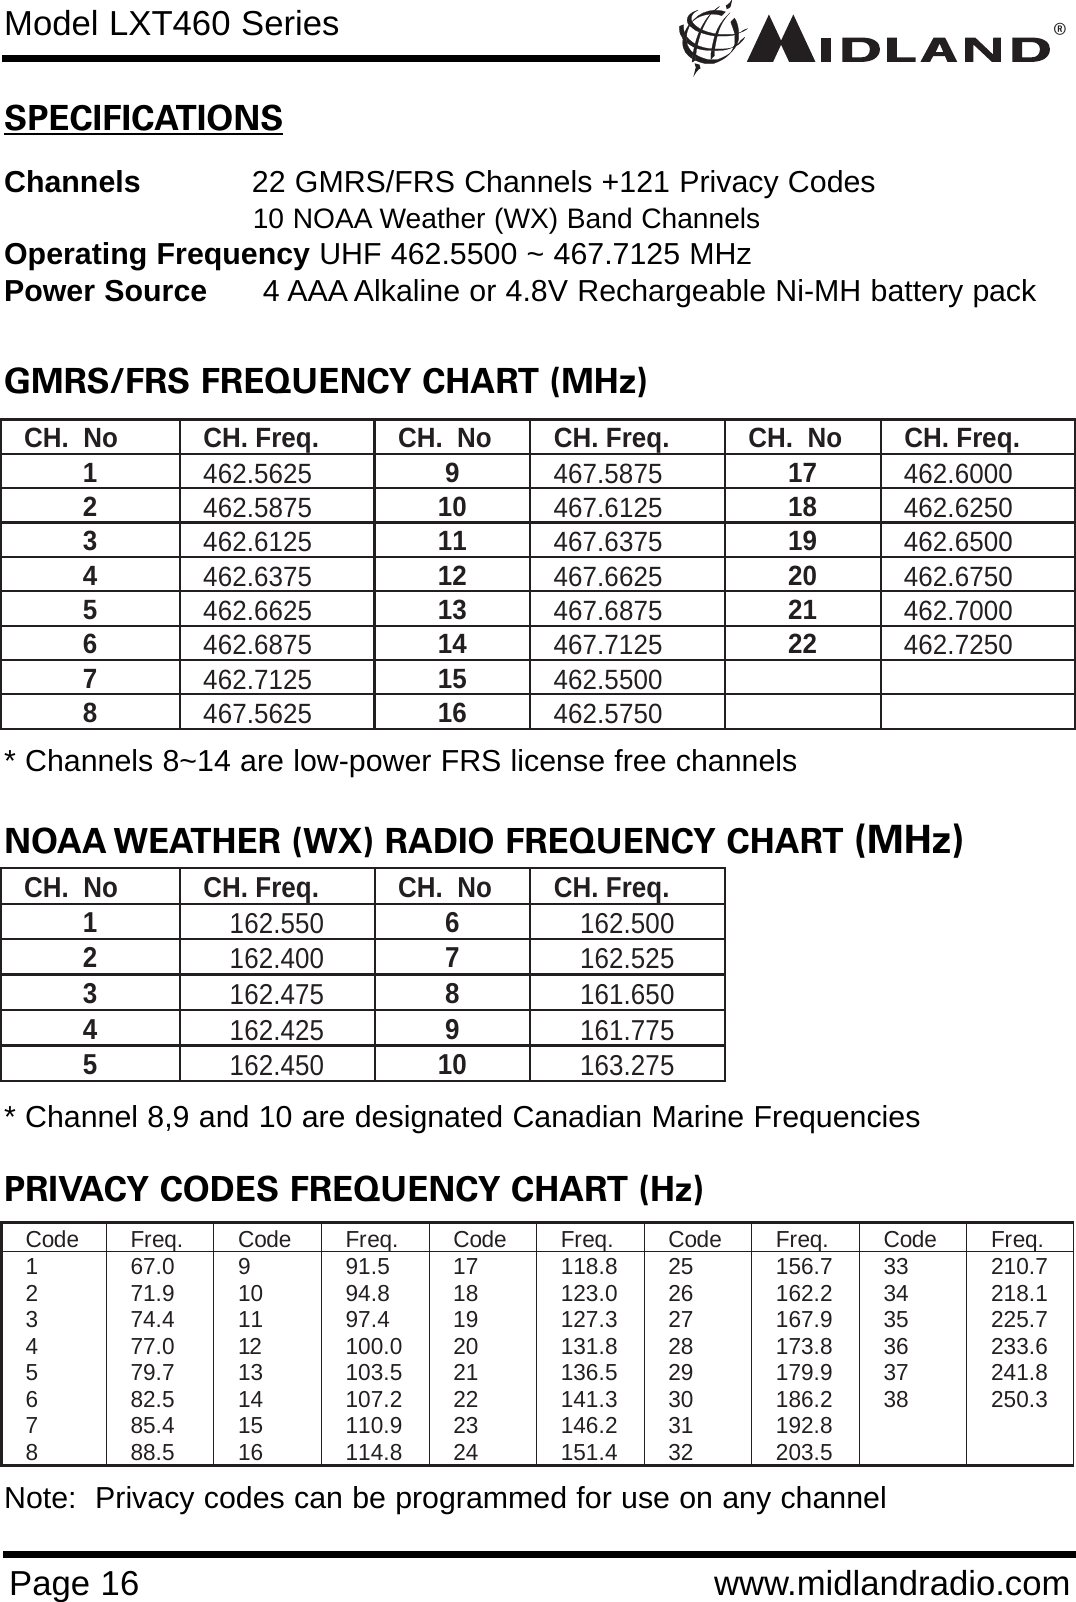 ®Page 16 www.midlandradio.comSPECIFICATIONSChannels 22 GMRS/FRS Channels +121 Privacy Codes10 NOAA Weather (WX) Band Channels Operating Frequency UHF 462.5500 ~ 467.7125 MHzPower Source 4 AAA Alkaline or 4.8V Rechargeable Ni-MH battery packGMRS/FRS FREQUENCY CHART (MHz)CH.  No  CH. Freq.  CH.  No  CH. Freq.  CH.  No  CH. Freq. 1  462.5625 9  467.5875 17  462.6000 2  462.5875 10  467.6125 18  462.6250 3  462.6125 11  467.6375 19  462.6500 4  462.6375 12  467.6625 20  462.6750 5  462.6625 13  467.6875 21  462.7000 6  462.6875 14  467.7125 22  462.7250 7  462.7125 15  462.5500   8  467.5625 16  462.5750   NOAA WEATHER (WX) RADIO FREQUENCY CHART (MHz)CH.  No  CH. Freq.  CH.  No  CH. Freq. 1  162.550 6  162.500 2  162.400 7  162.525 3  162.475 8  161.650 4  162.425 9  161.775 5  162.450 10  163.275 PRIVACY CODES FREQUENCY CHART (Hz)Code Freq.  Code Freq.  Code Freq.  Code Freq.  Code Freq.  1  67.0 9  91.5 17  118.8 25  156.7 33  210.7 2  71.9 10  94.8 18  123.0 26  162.2 34  218.1 3  74.4 11  97.4 19  127.3 27  167.9 35  225.7 4 77.0 12 100.0 20  131.8 28  173.8 36  233.6 5 79.7 13 103.5 21  136.5 29  179.9 37  241.8 6 82.5 14 107.2 22  141.3 30  186.2 38  250.3 7 85.4 15 110.9 23  146.2 31  192.8    8 88.5 16 114.8 24  151.4 32  203.5    * Channel 8,9 and 10 are designated Canadian Marine Frequencies* Channels 8~14 are low-power FRS license free channelsNote:  Privacy codes can be programmed for use on any channelModel LXT460 Series